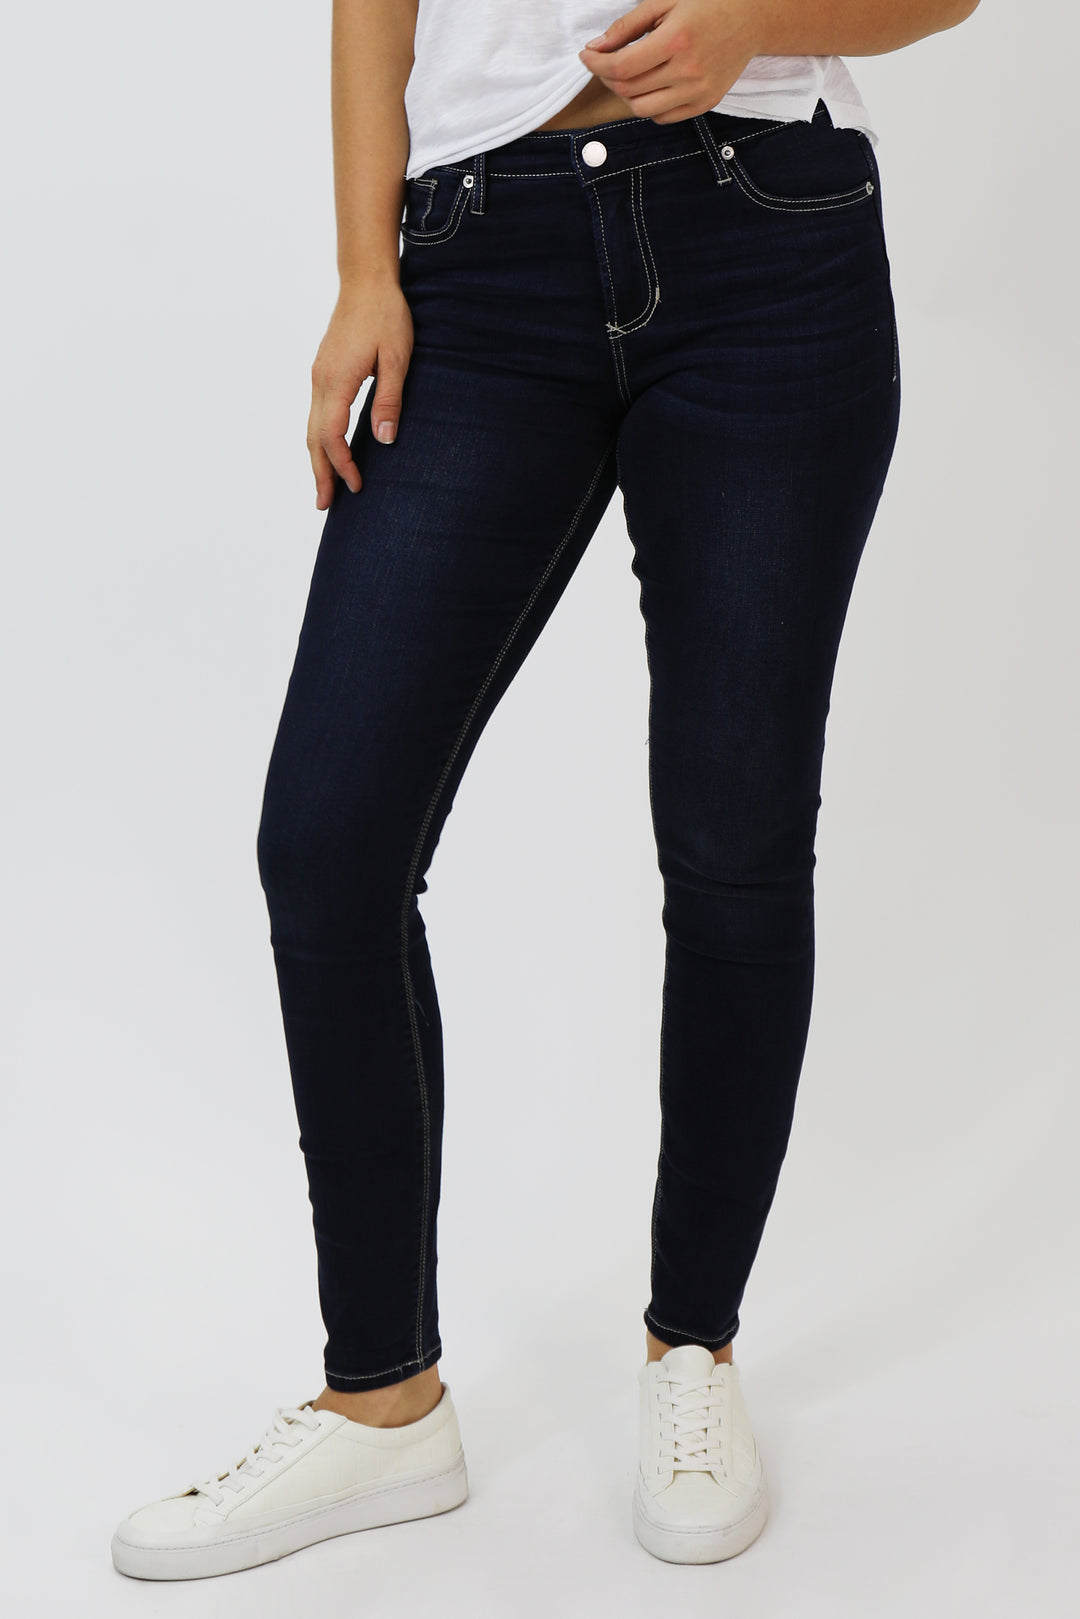 image of a female model wearing a gisele high rise skinny jeans cameron JEANS